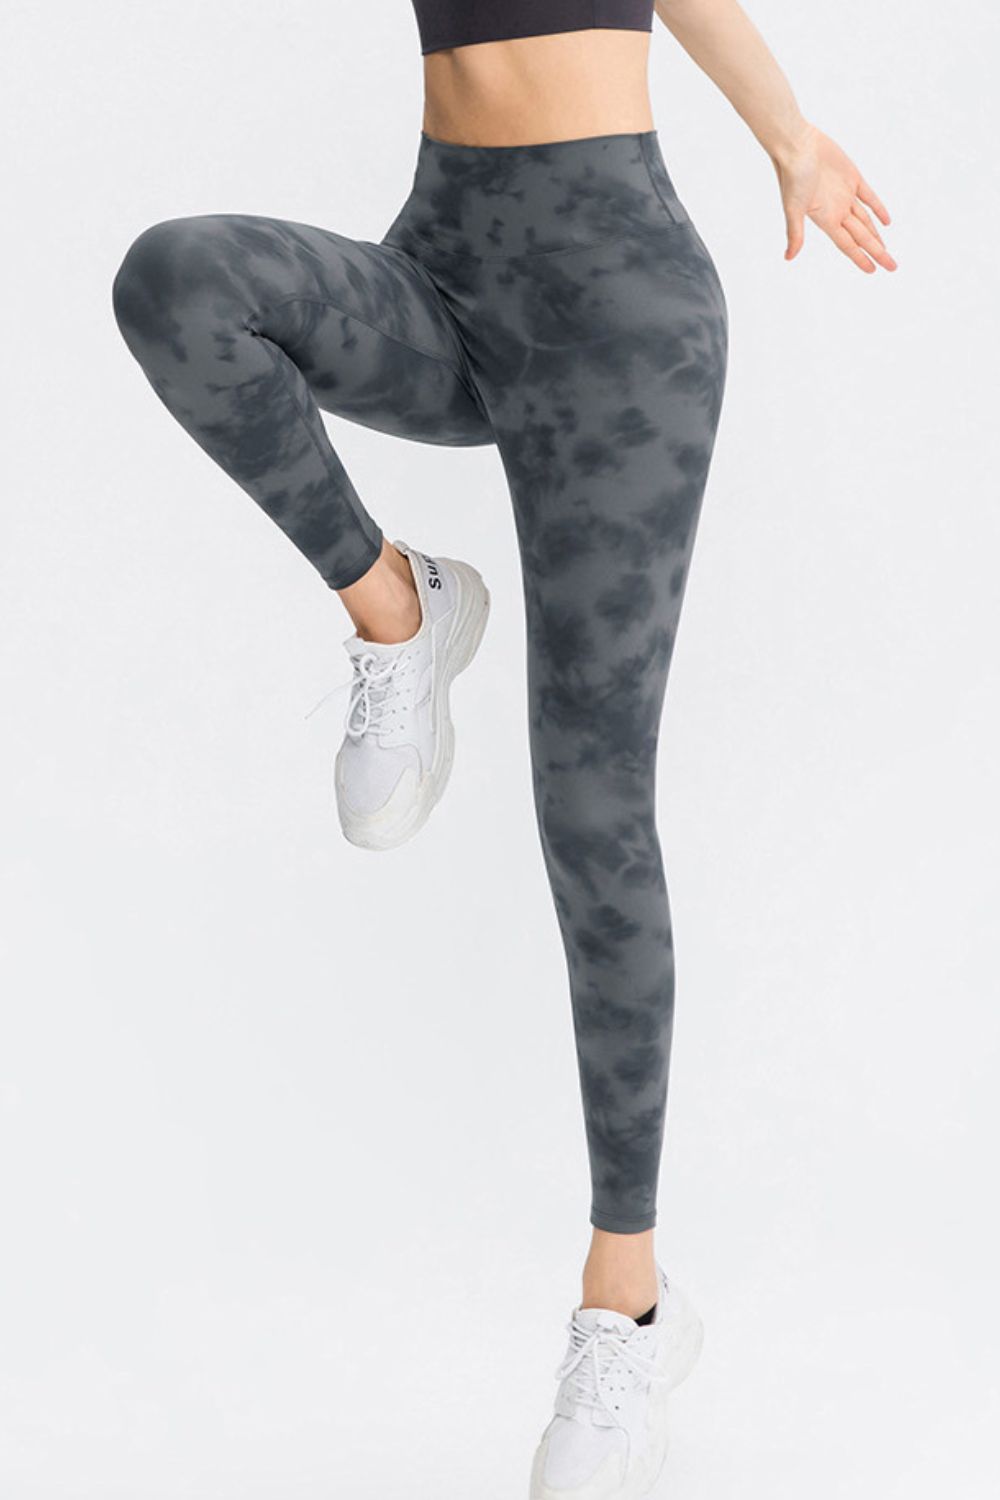 Wide Waistband Slim Fit Long Sports Pants - Leggings - FITGGINS